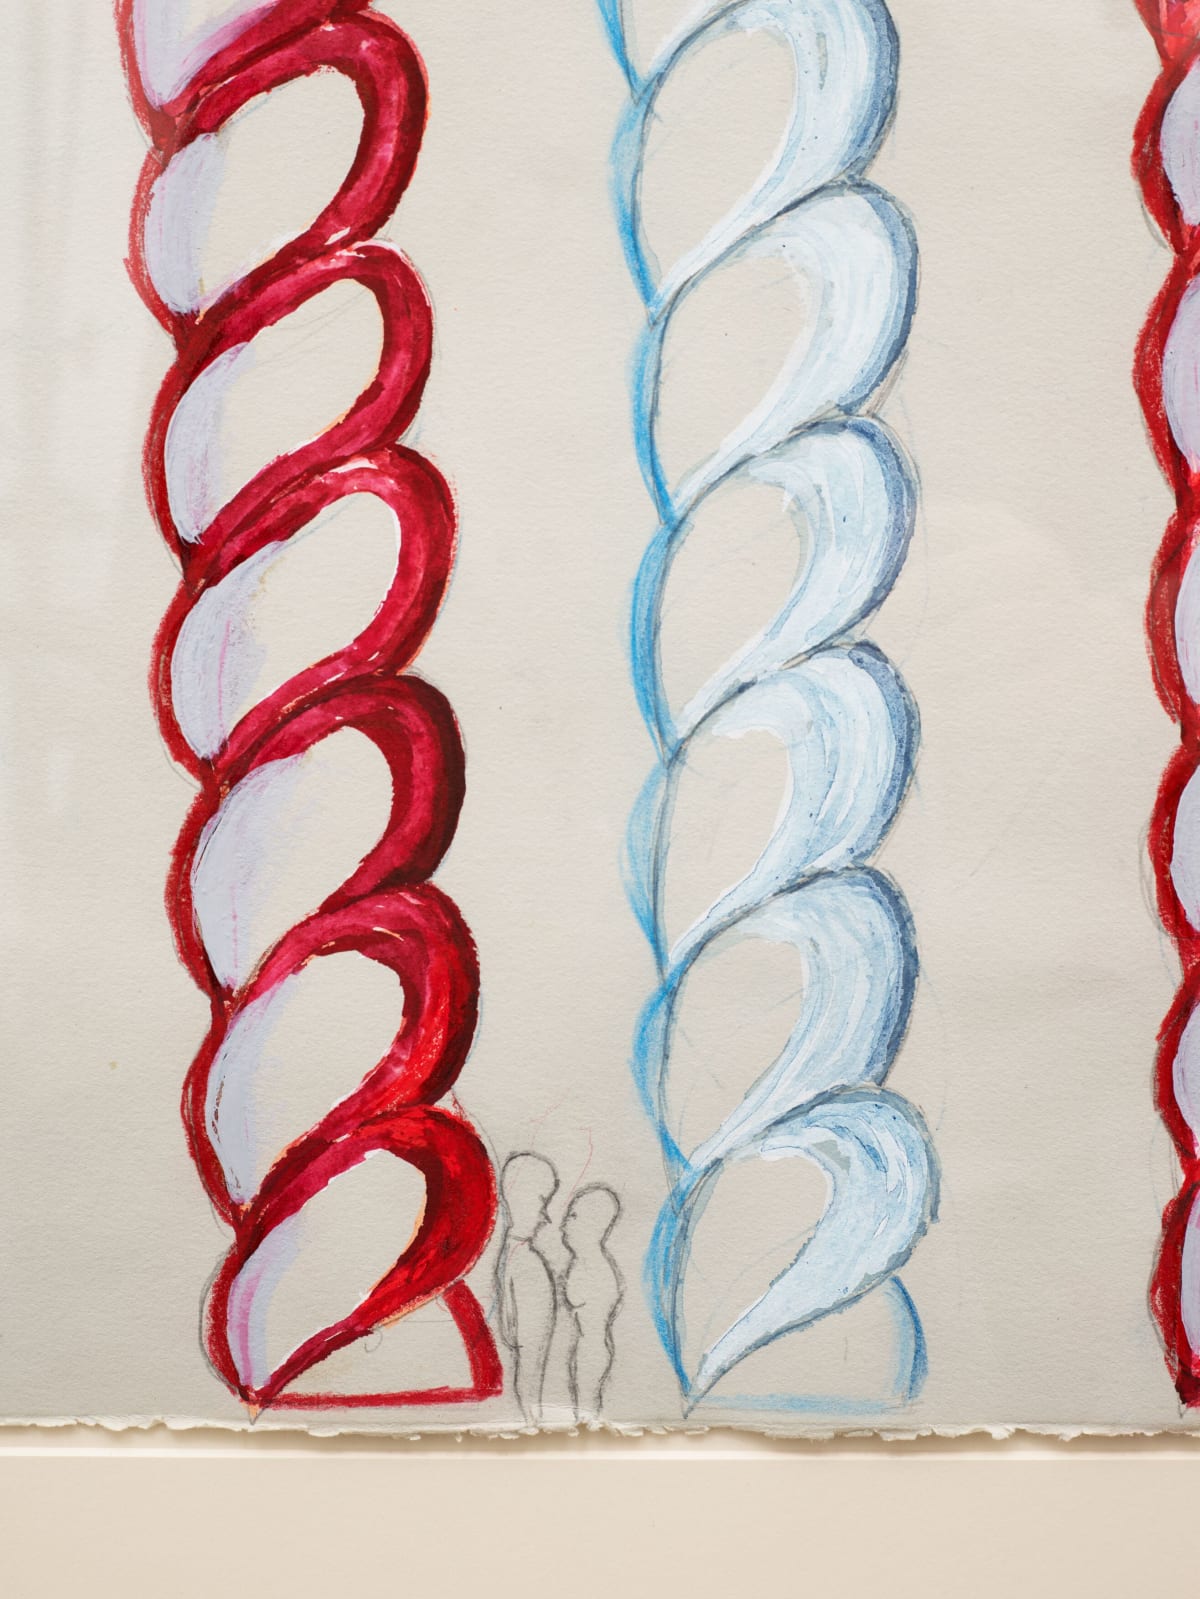 LOUISE BOURGEOIS, UNTITLED